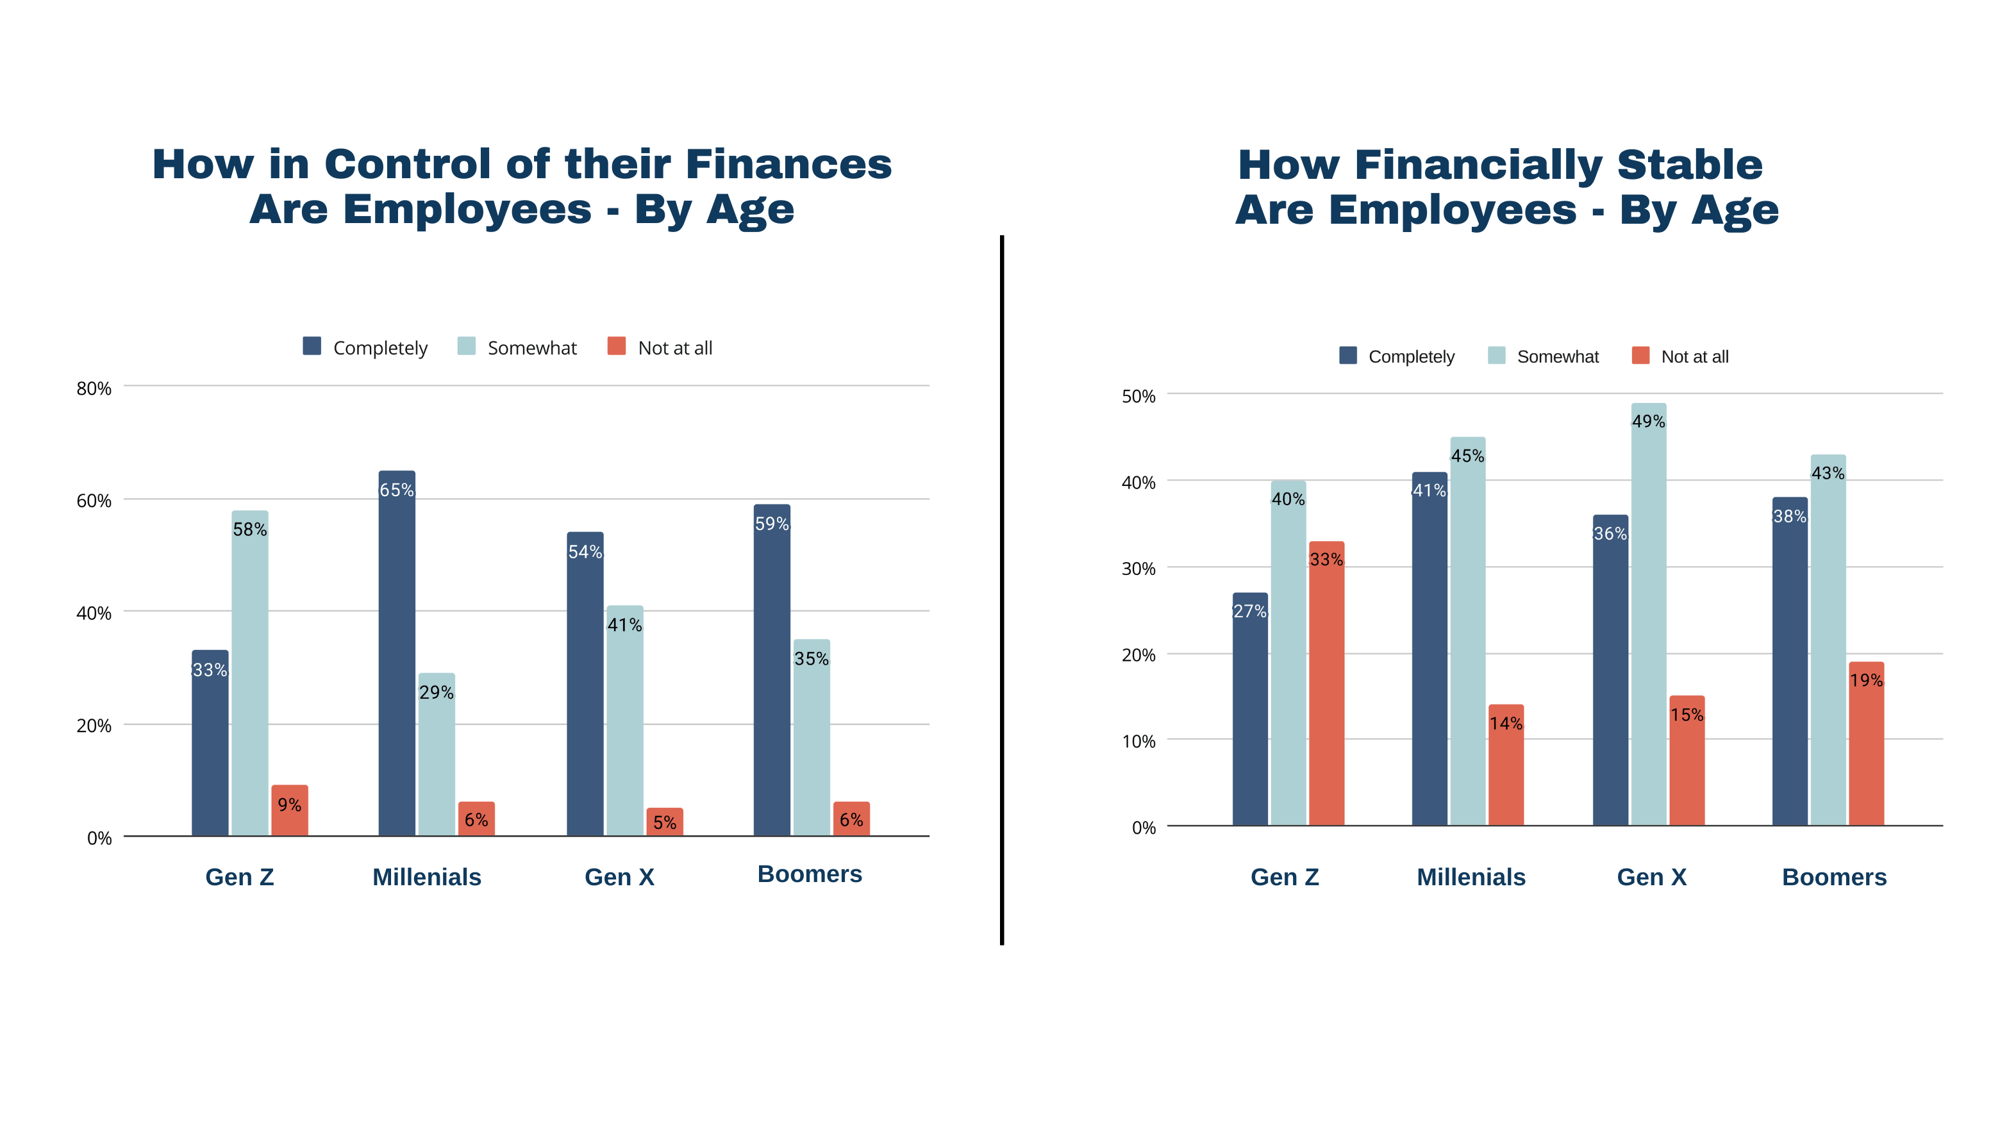 How In control of their fiannces are employees - by age